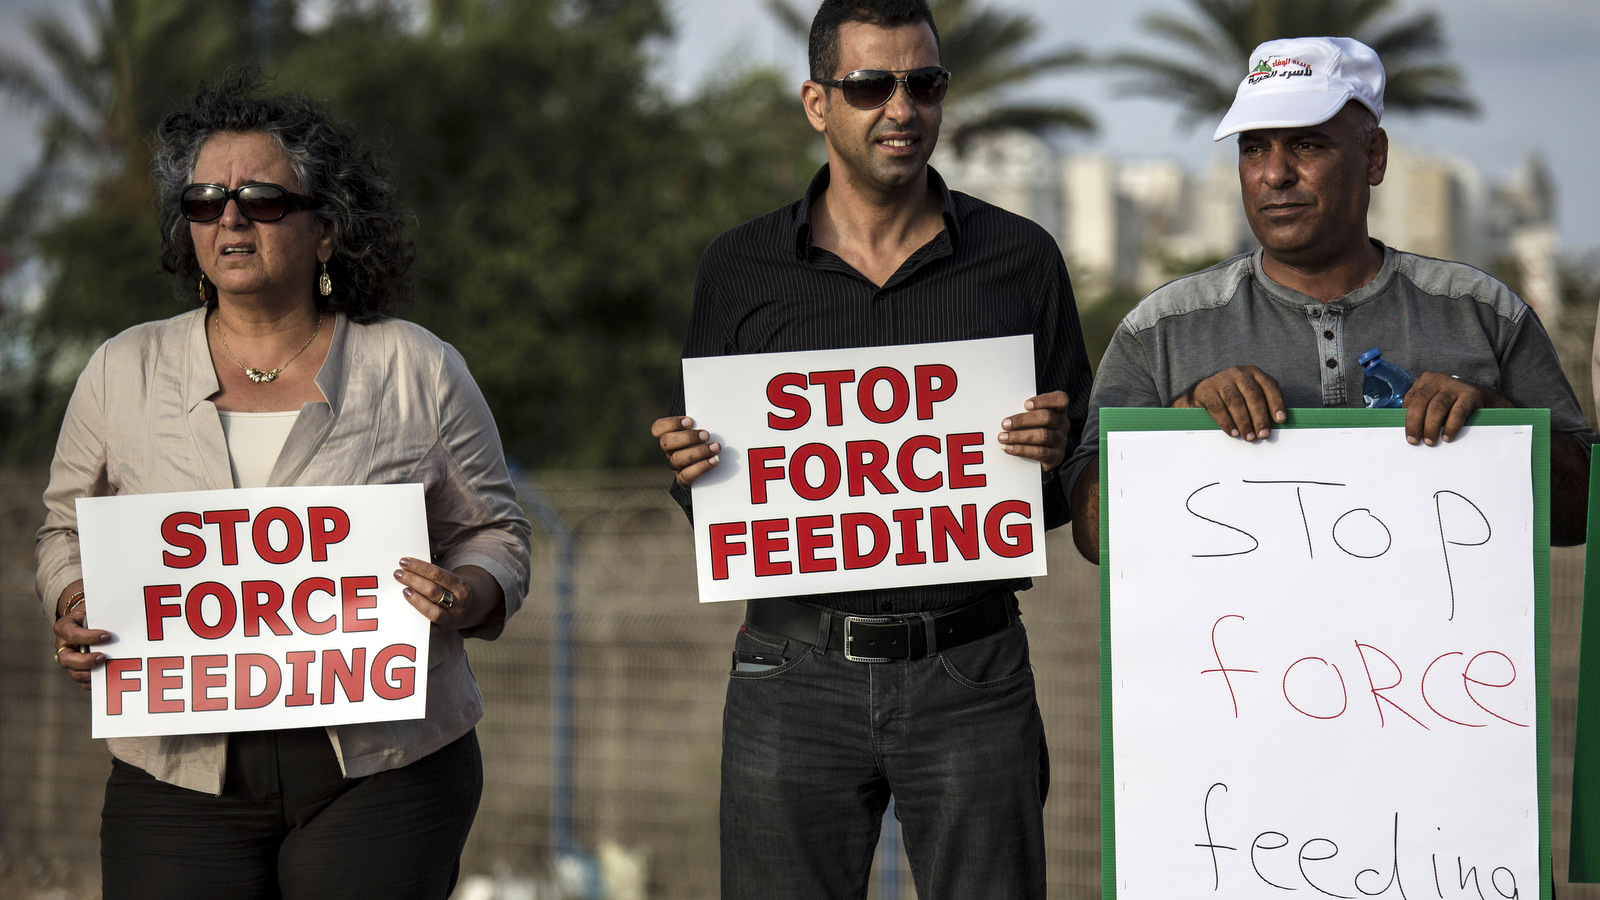 In this Tuesday, August 11, 2015 file photo, Israeli Arab supporters of Mohammed Allan, a Palestinian prisoner on a hunger strike, hold signs during a rally outside Barzilai hospital, in the costal city of Ashkelon, Israel. (AP Photo/Tsafrir Abayov, File)